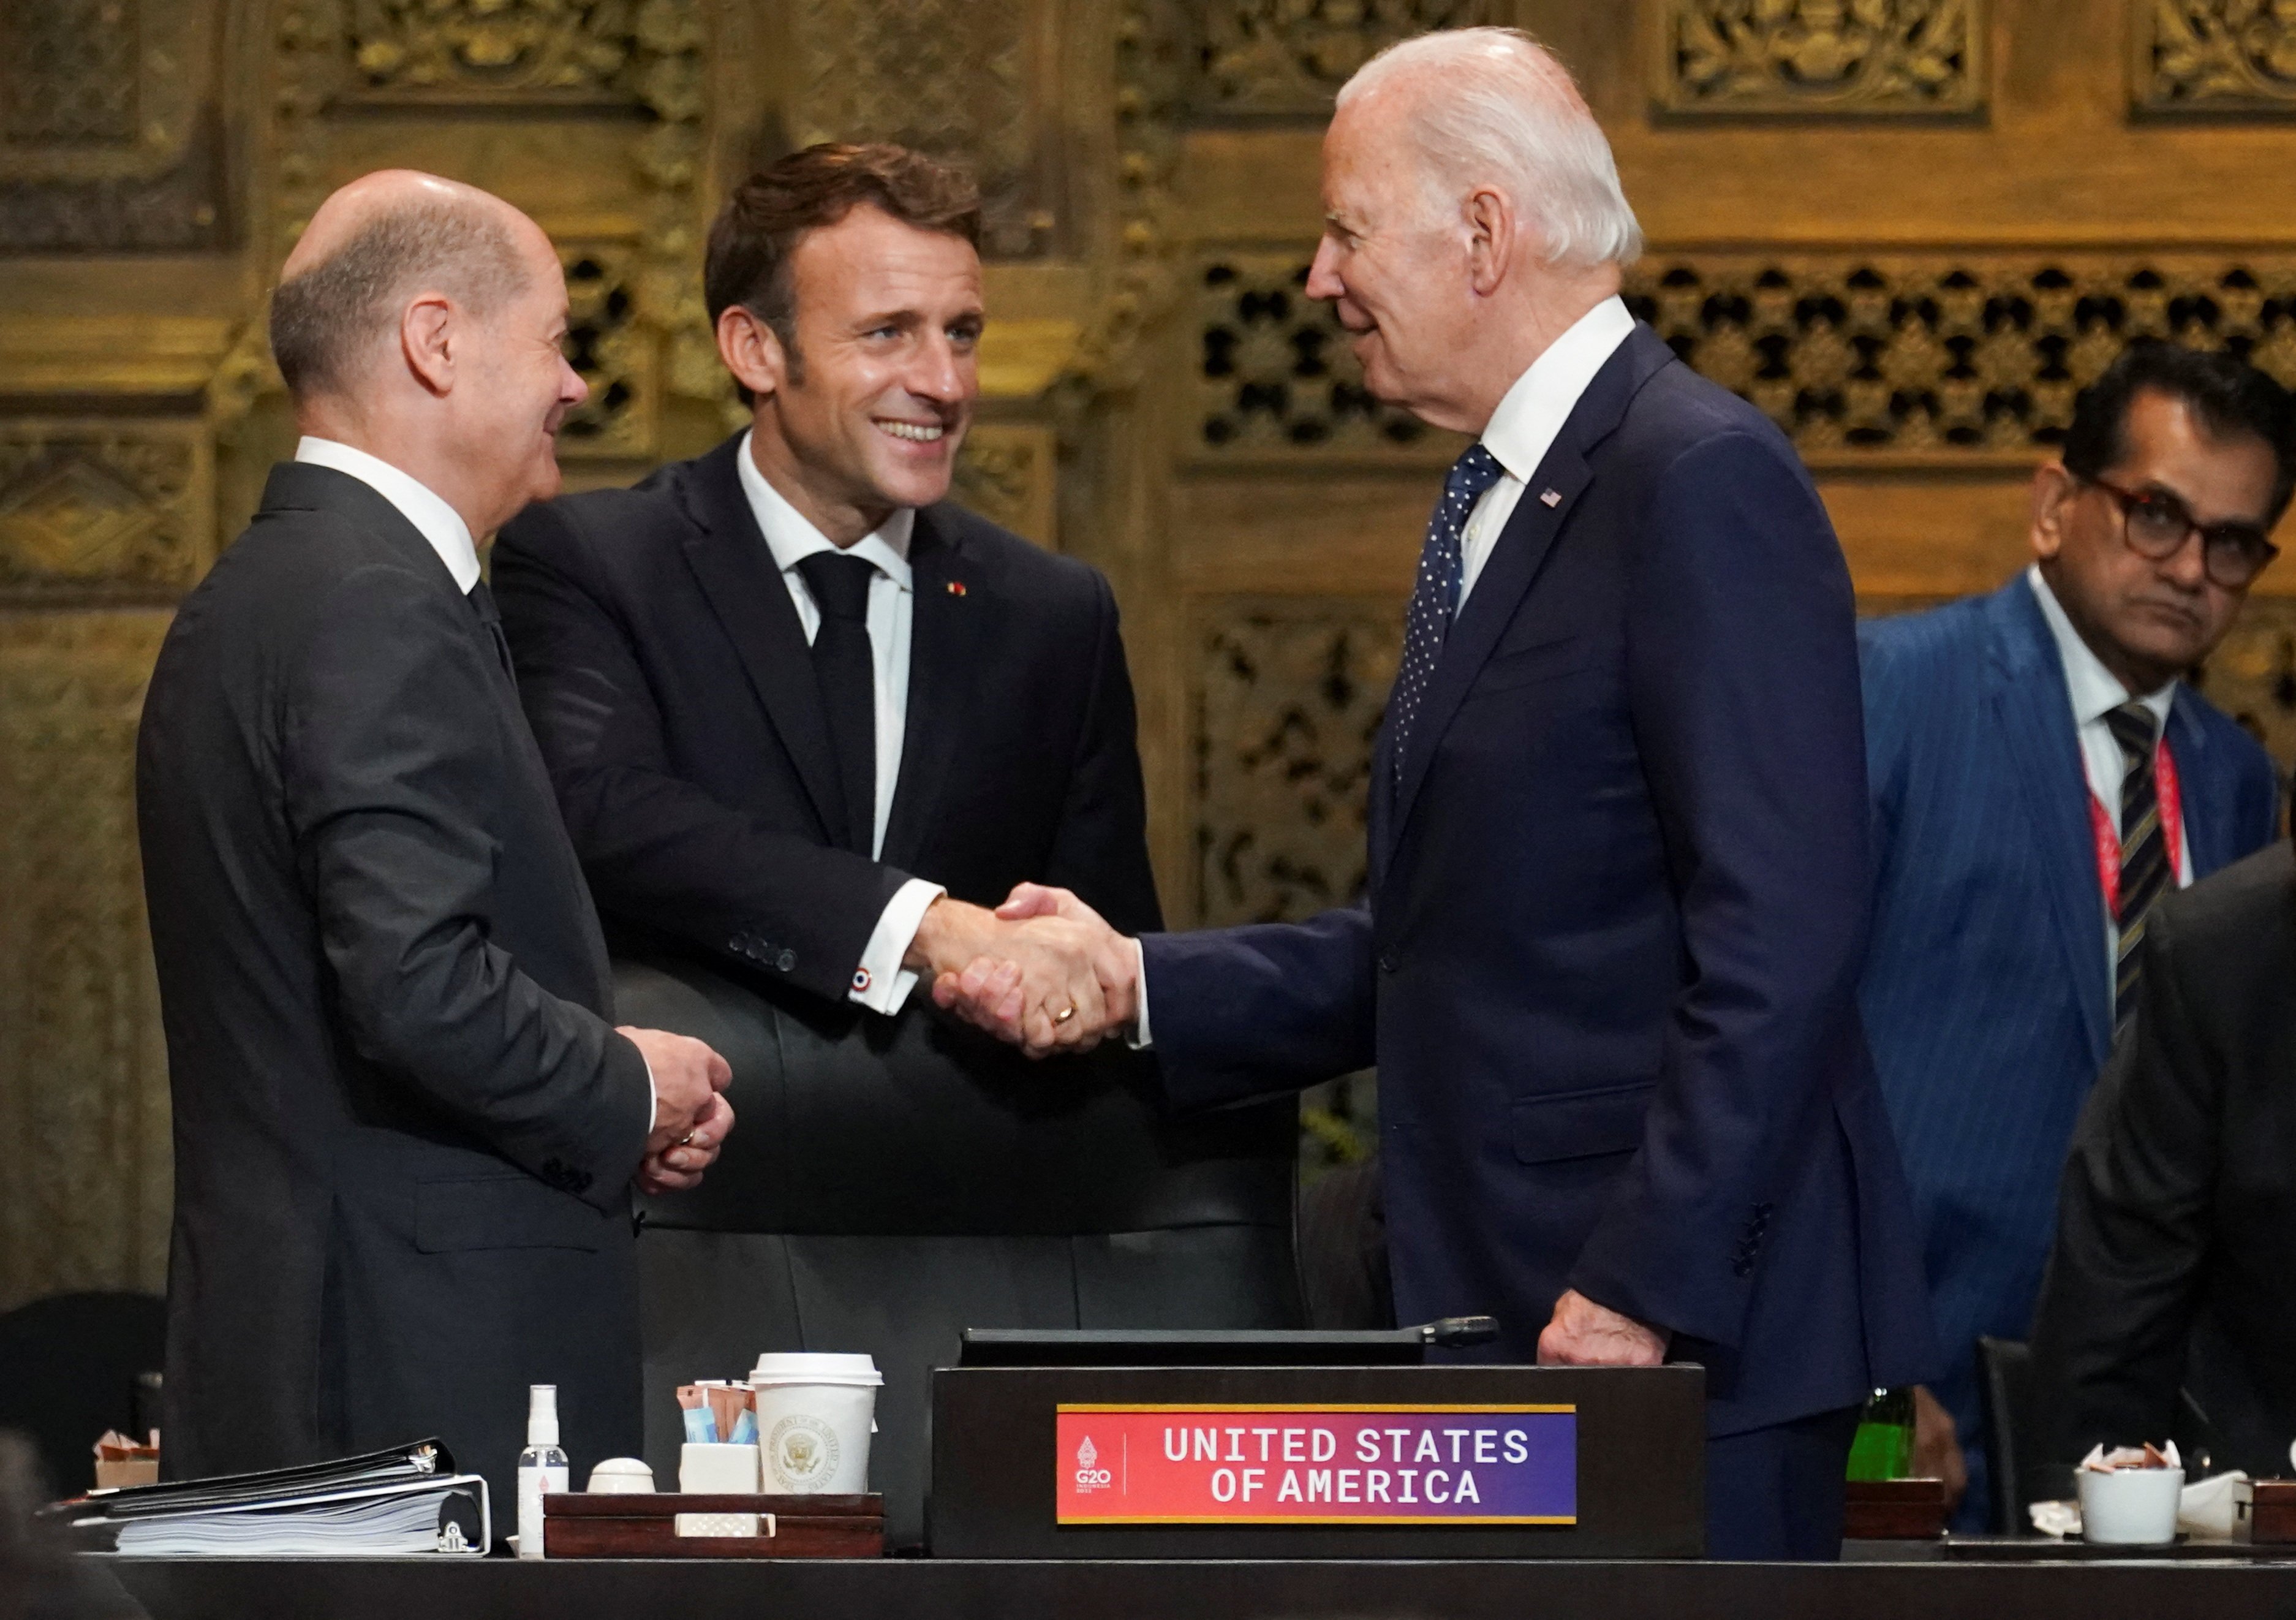 German Chancellor Olaf Scholz (left) and French President Emmanuel Macron (centre) greet US President Joe Biden during the first working session of the Group of 20 leaders’ summit in Bali, Indonesia, on November 15. Macron has been a proponent of greater European strategic independence from the United States. Photo: Reuters